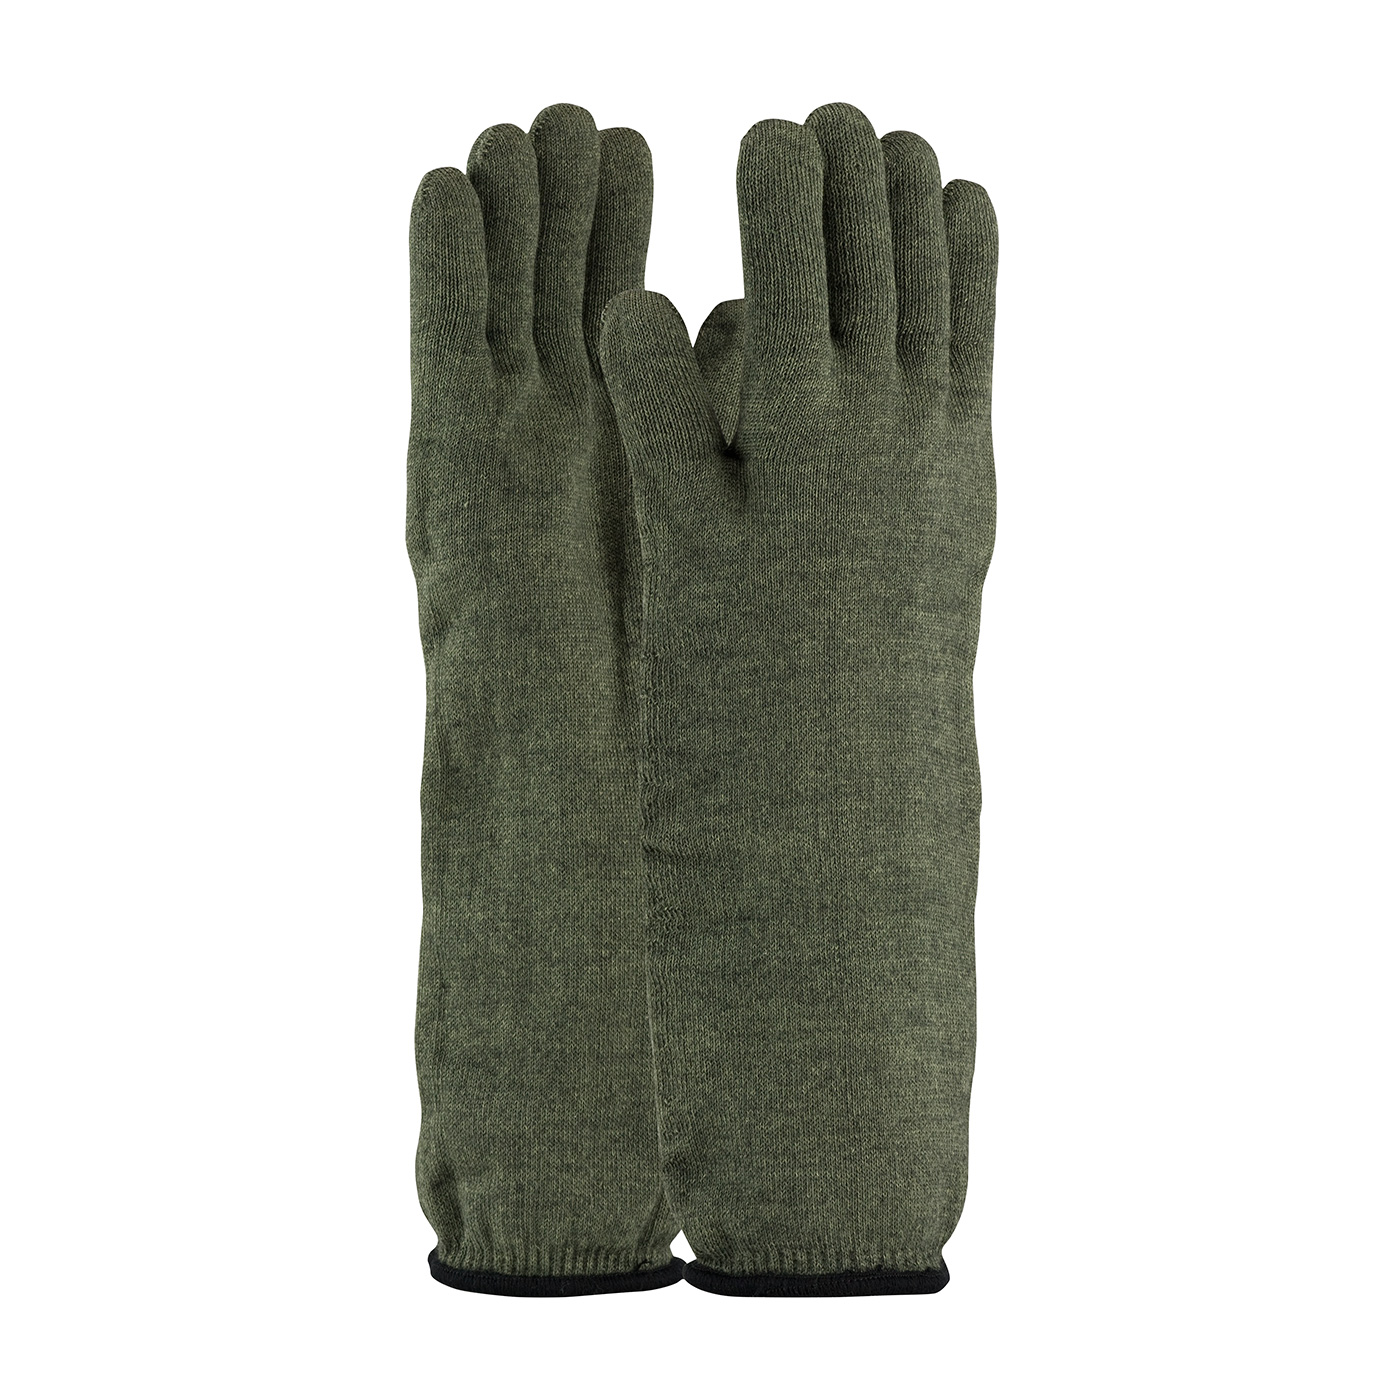 #43-858 PIP® Kut Gard®  Kevlar® / Preox Seamless Knit Hot Mill Glove with Cotton Liner and Extended Cuff 